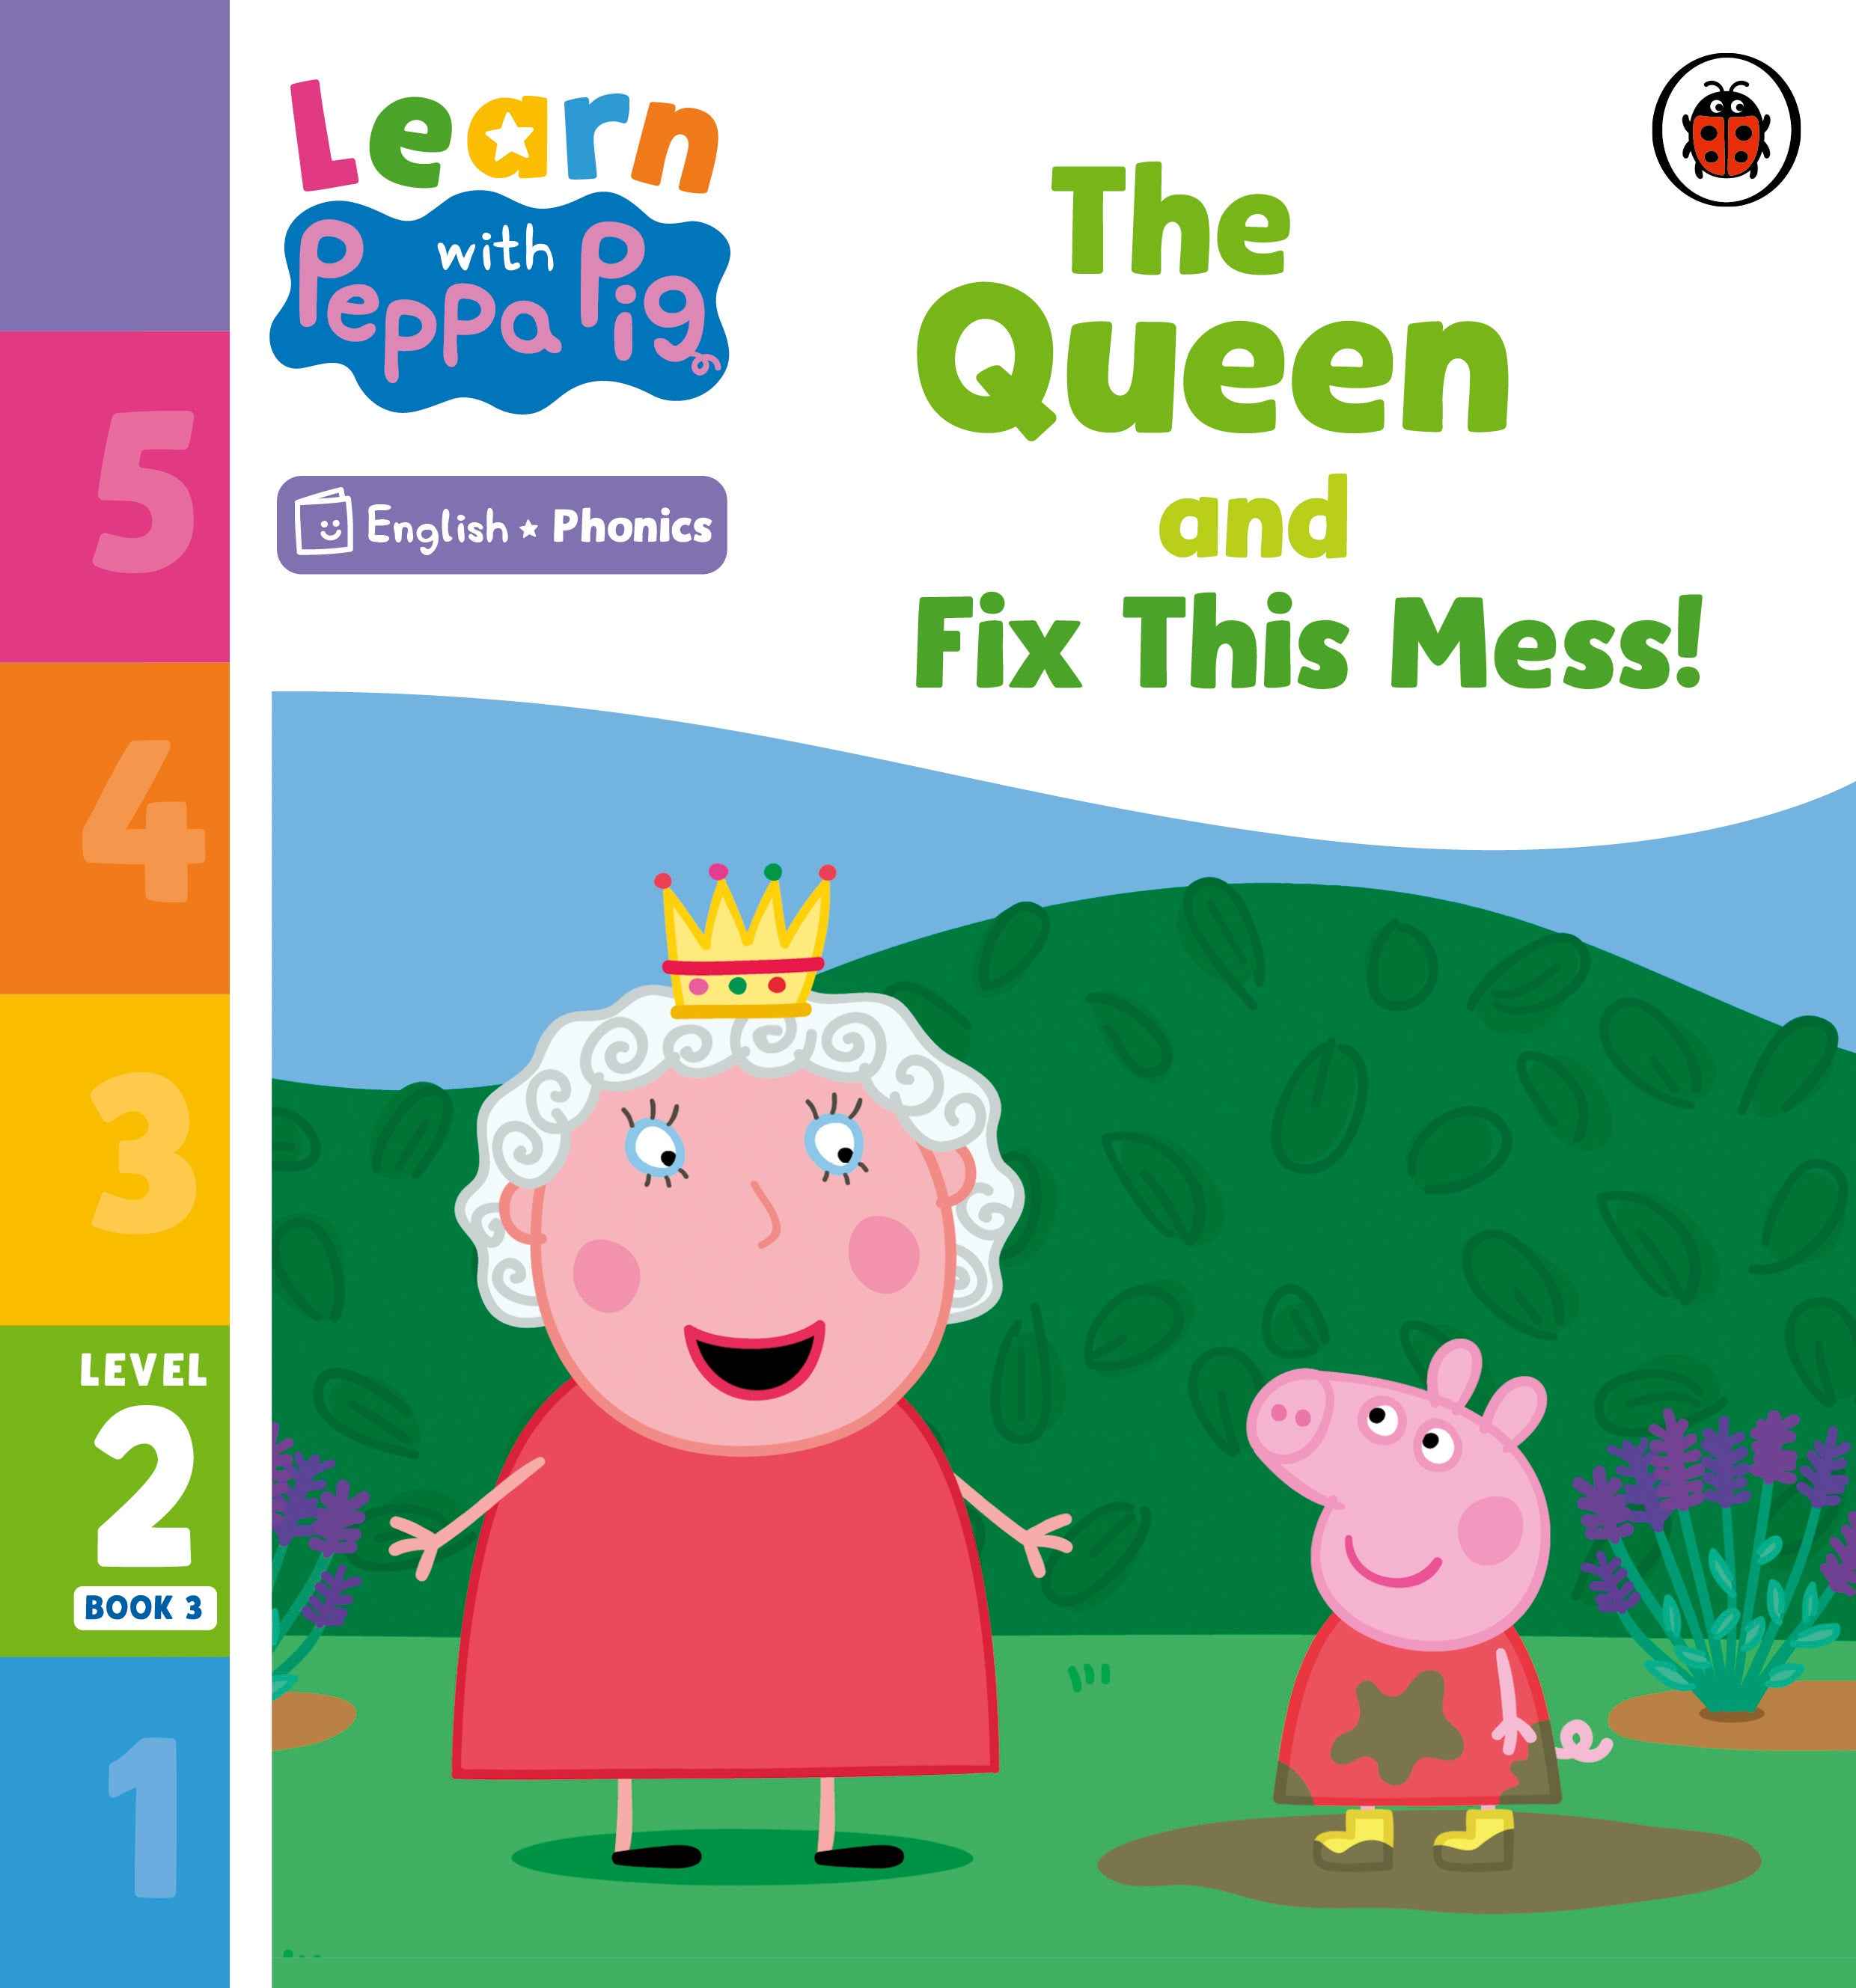 The Queen and Fix This Mess!